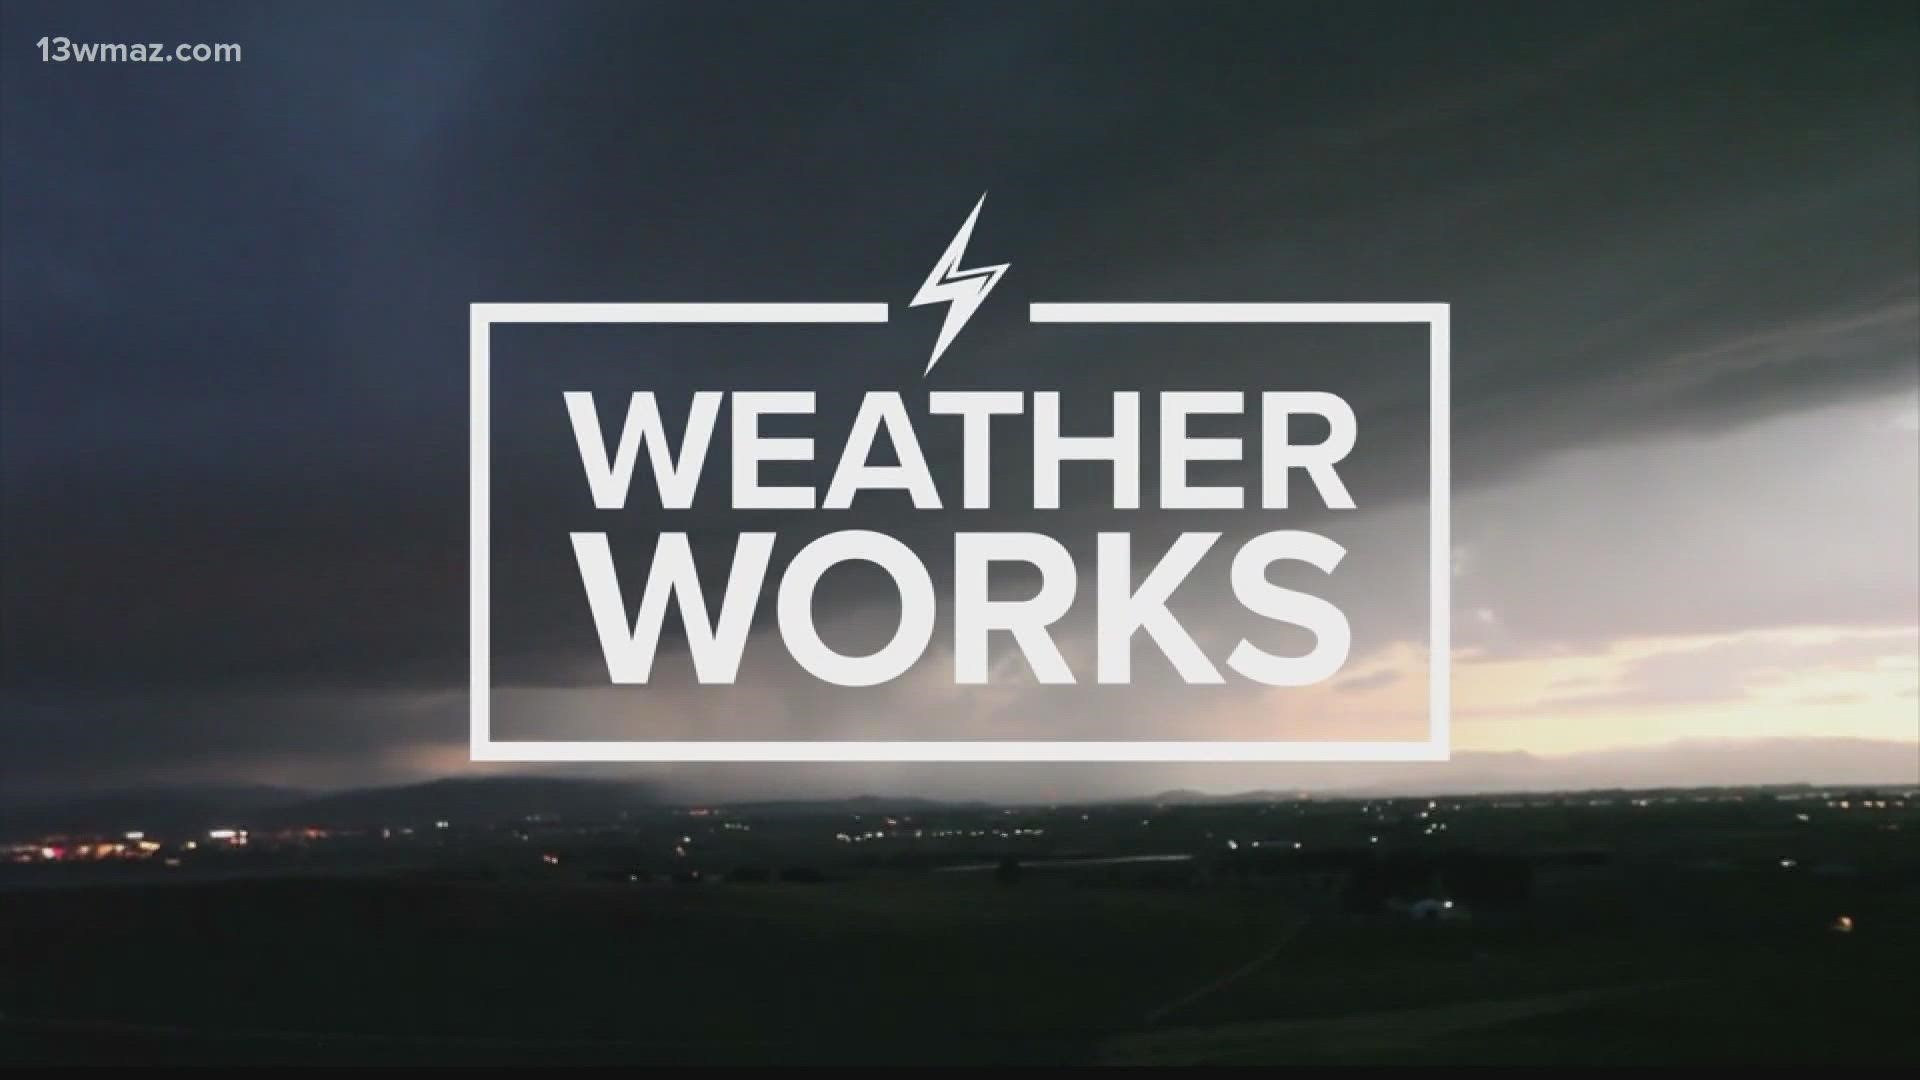 Meteorologist Taylor Stephenson explains how your weather works!